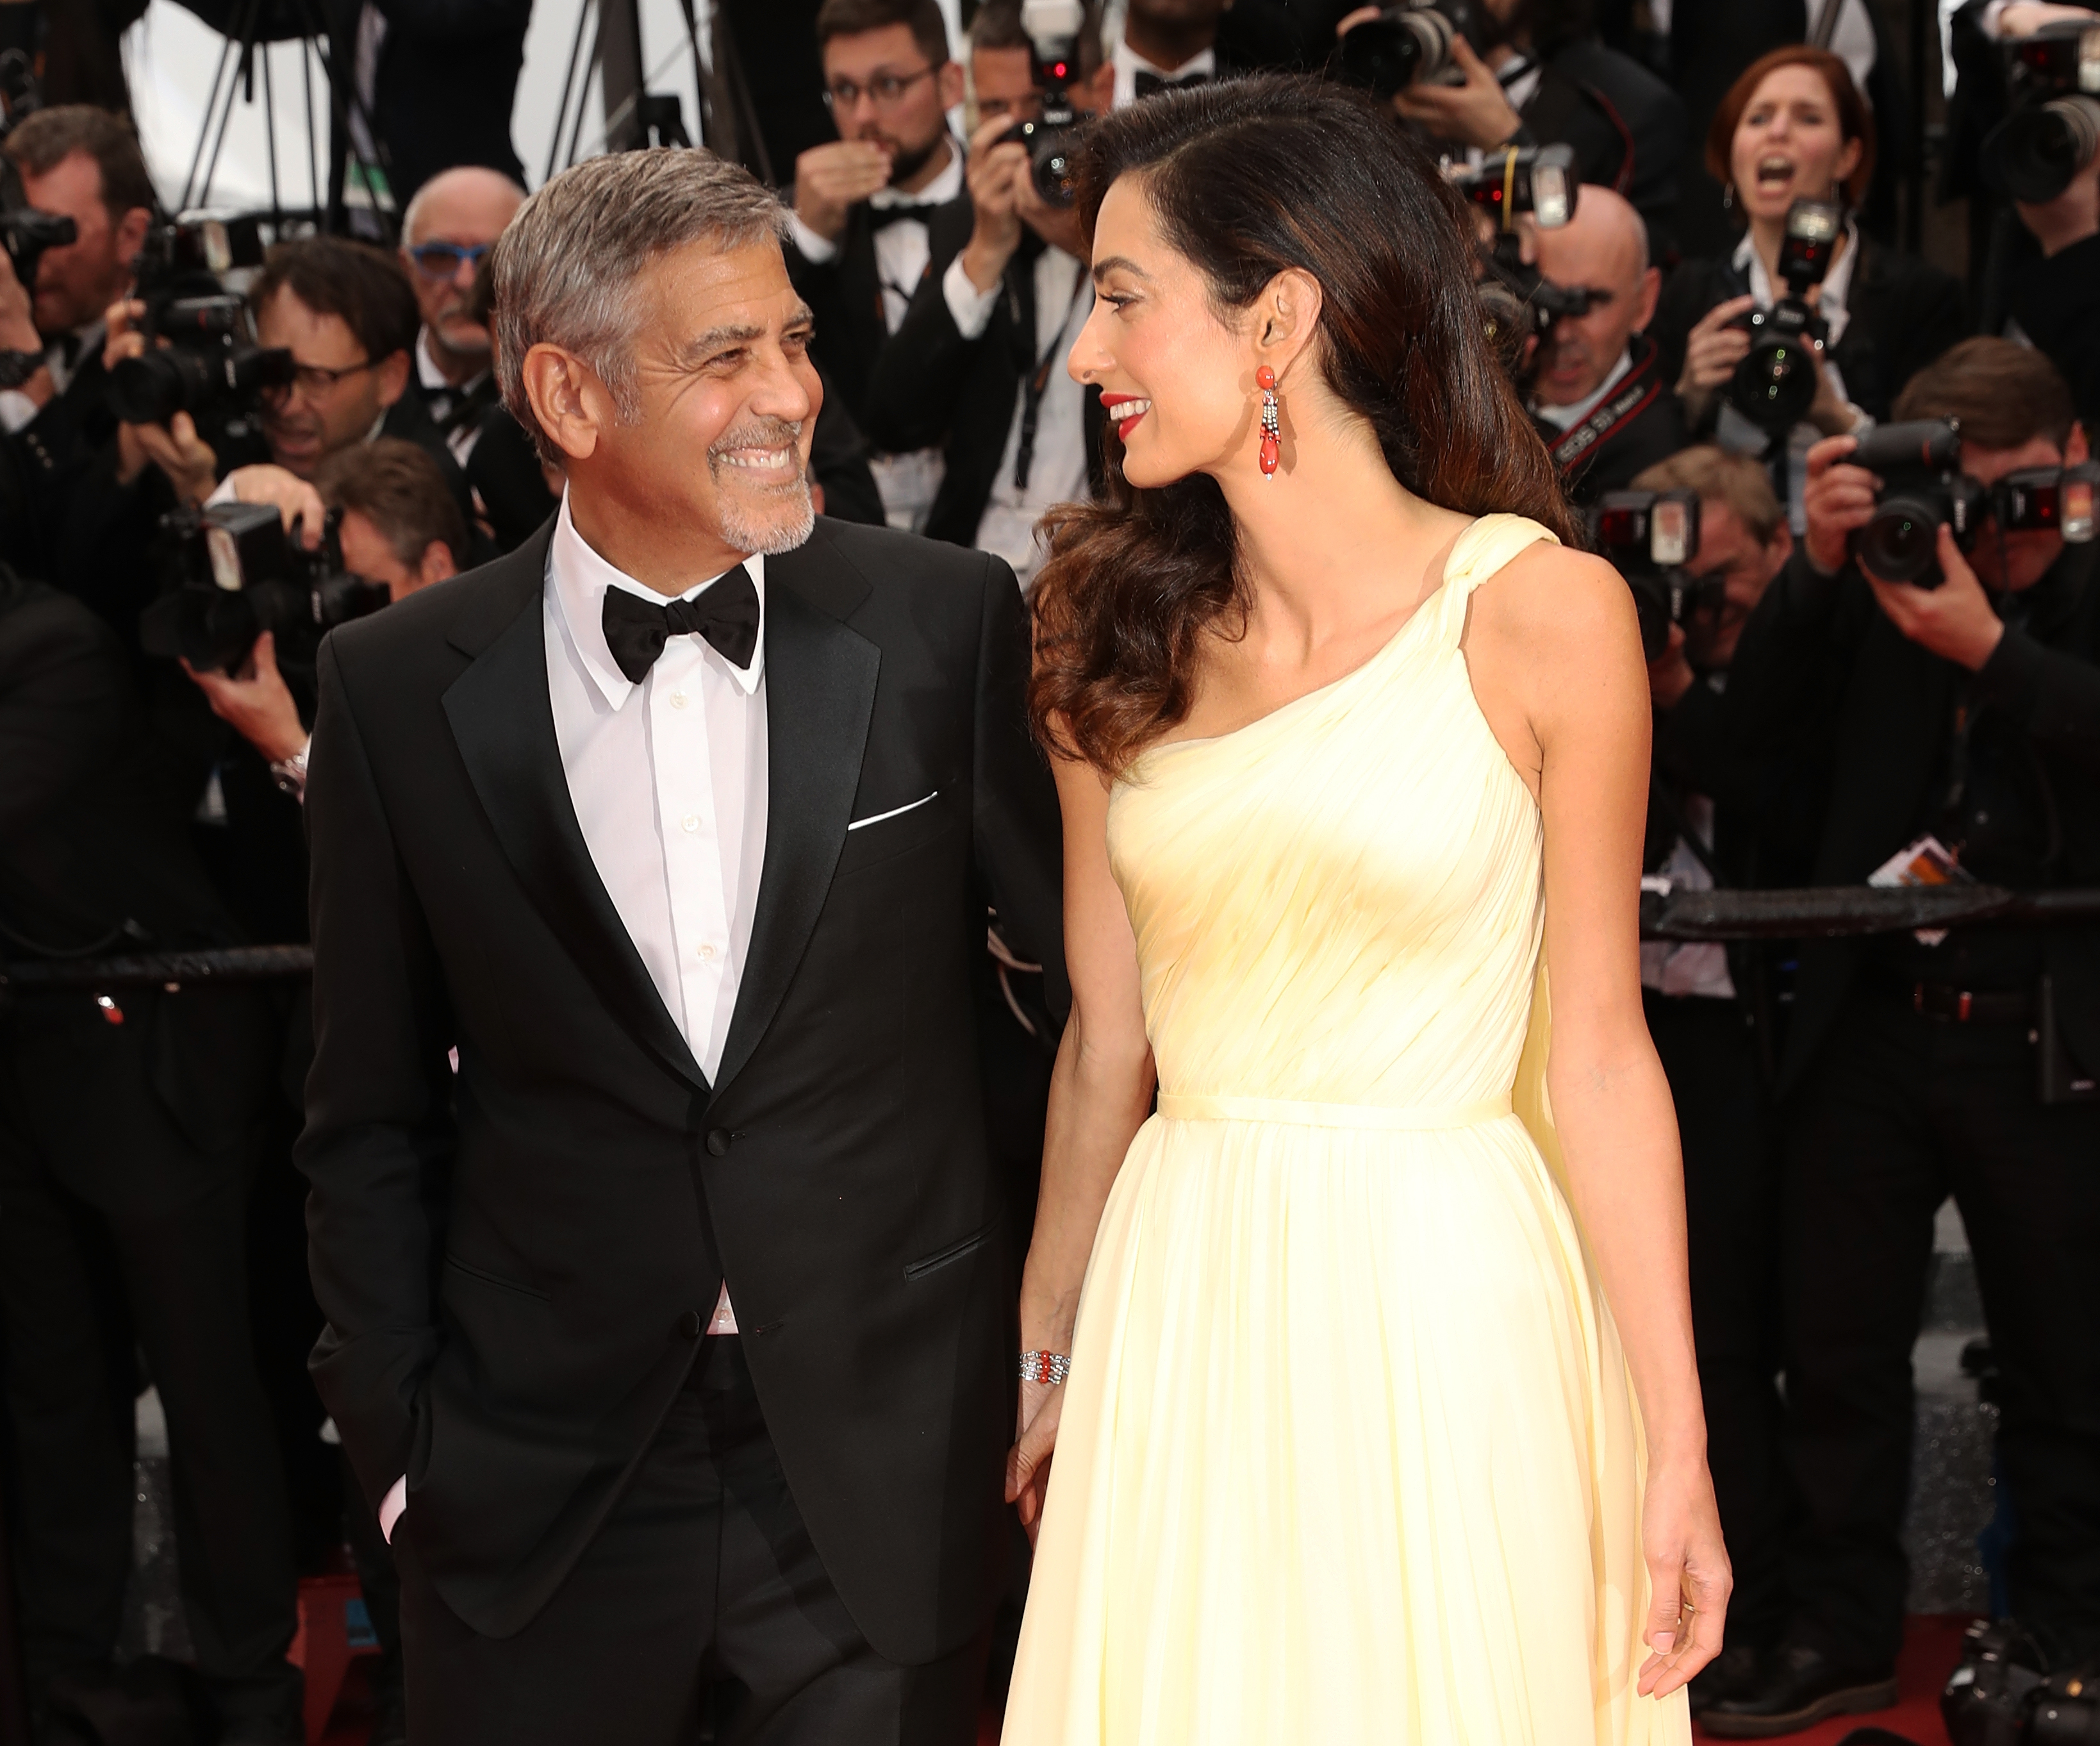 Amal Clooney and George Clooney in Cannes, France on May 12, 2015 | Source: Getty Images